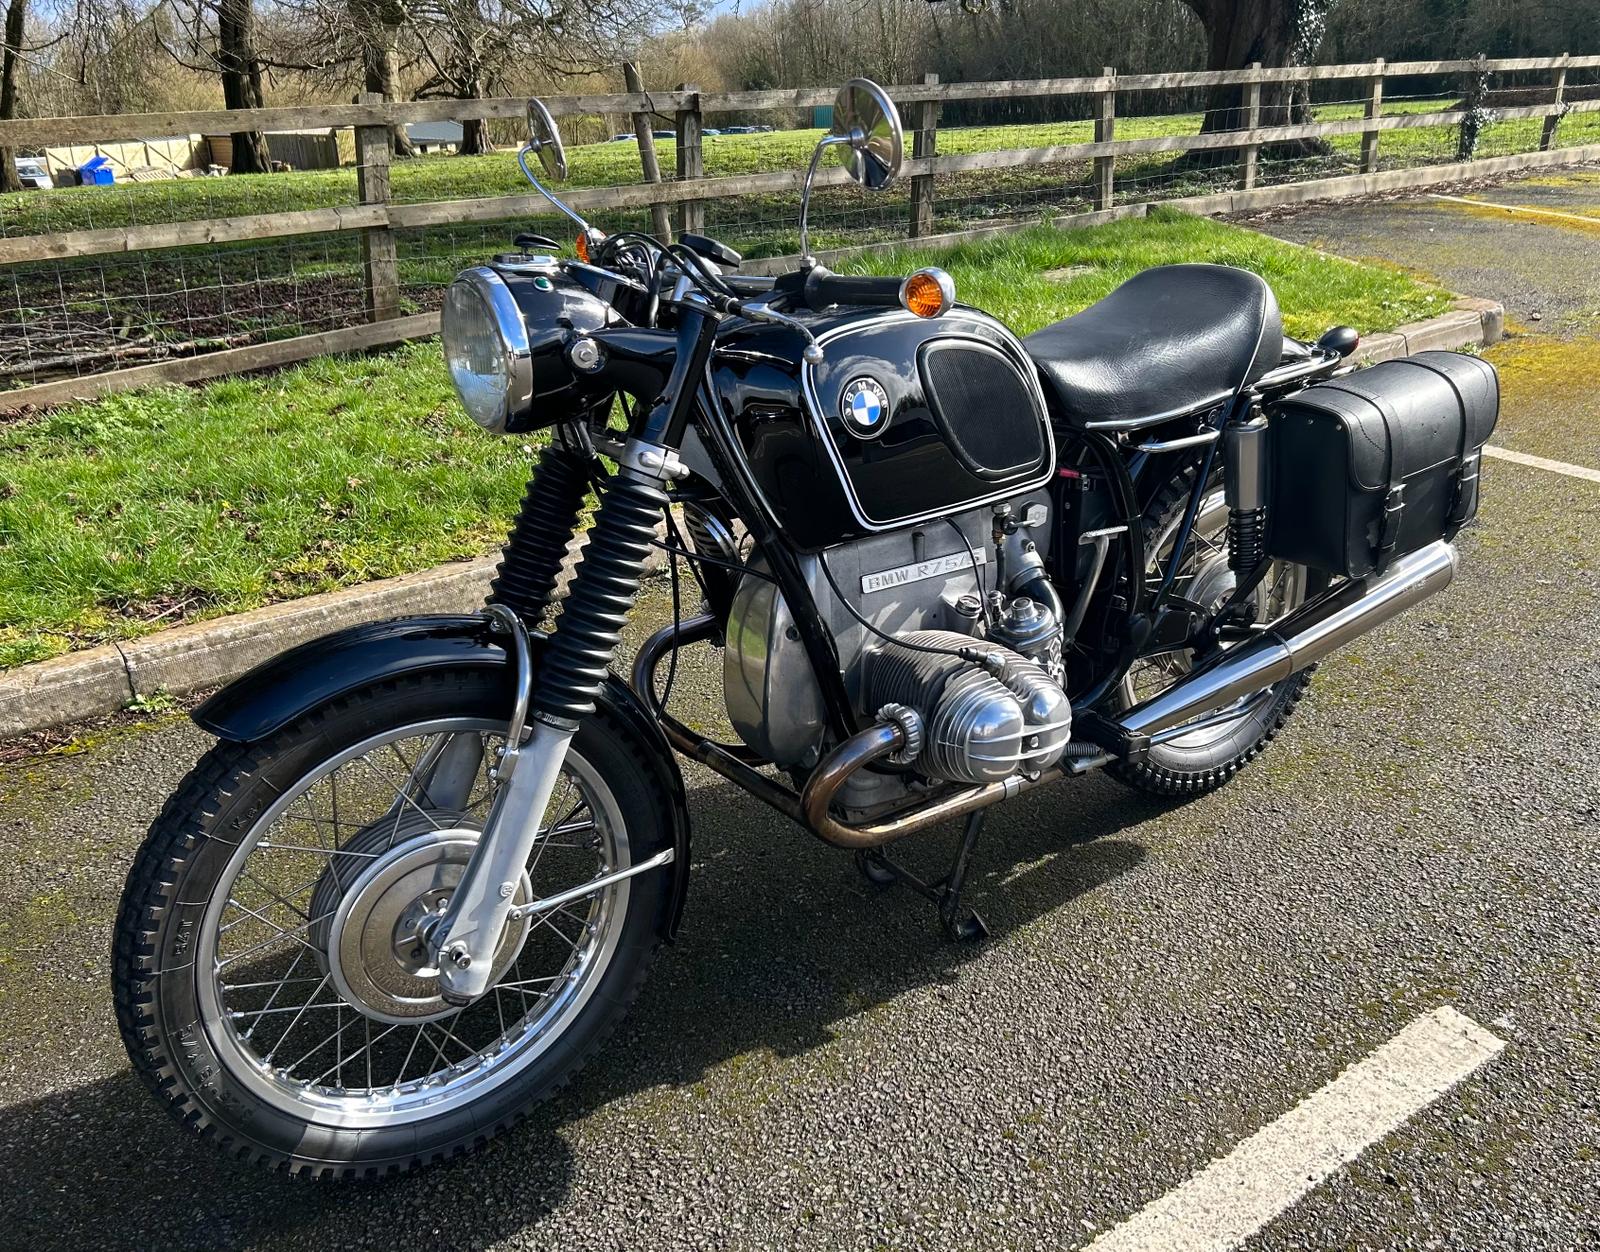 A BMW R75/5 MOTORCYCLE .1971. 72452 MILES. EXCELLENT WELL RESTORED CONDITION, V5, MOT AND TAX - Image 4 of 17